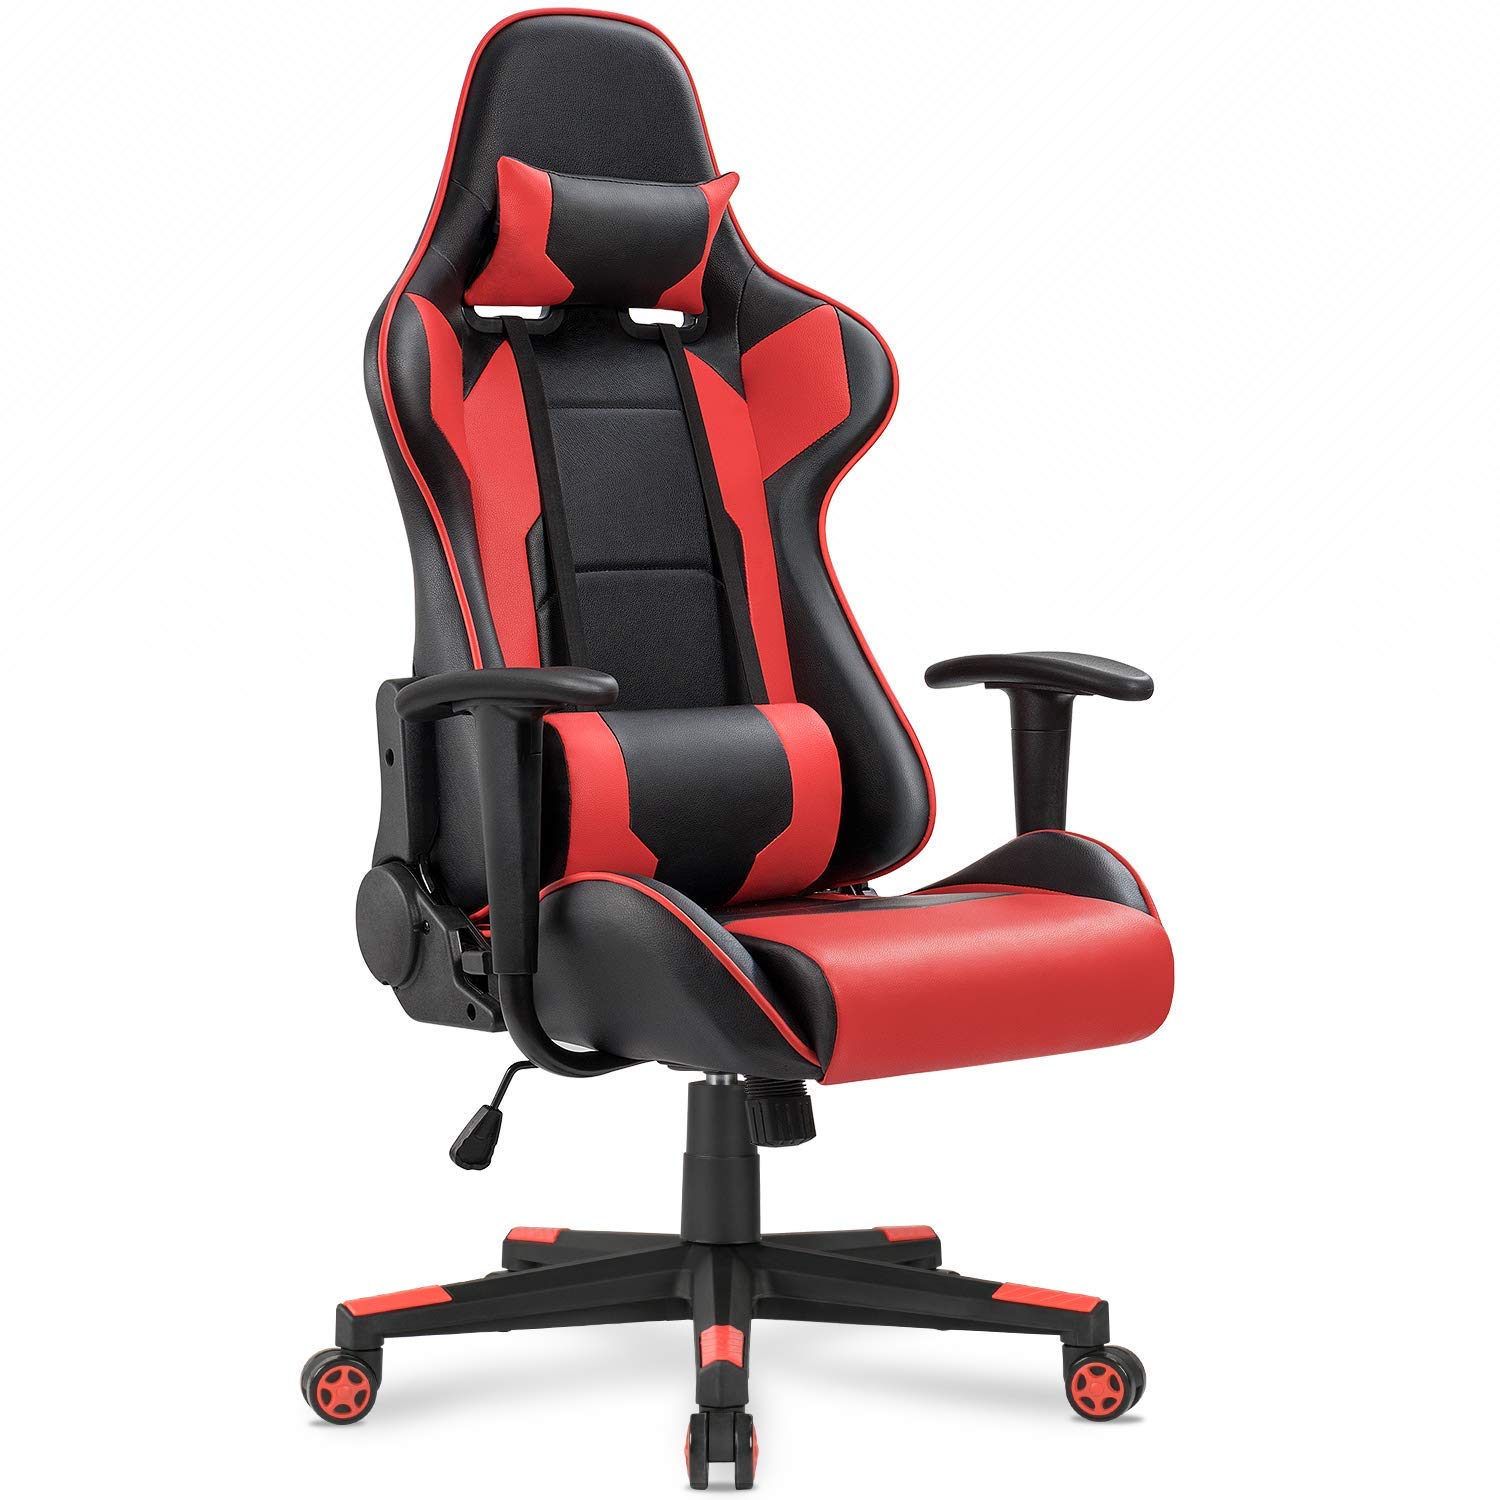 Best Gaming Chairs Under 200$ - Ultimate Game Chair